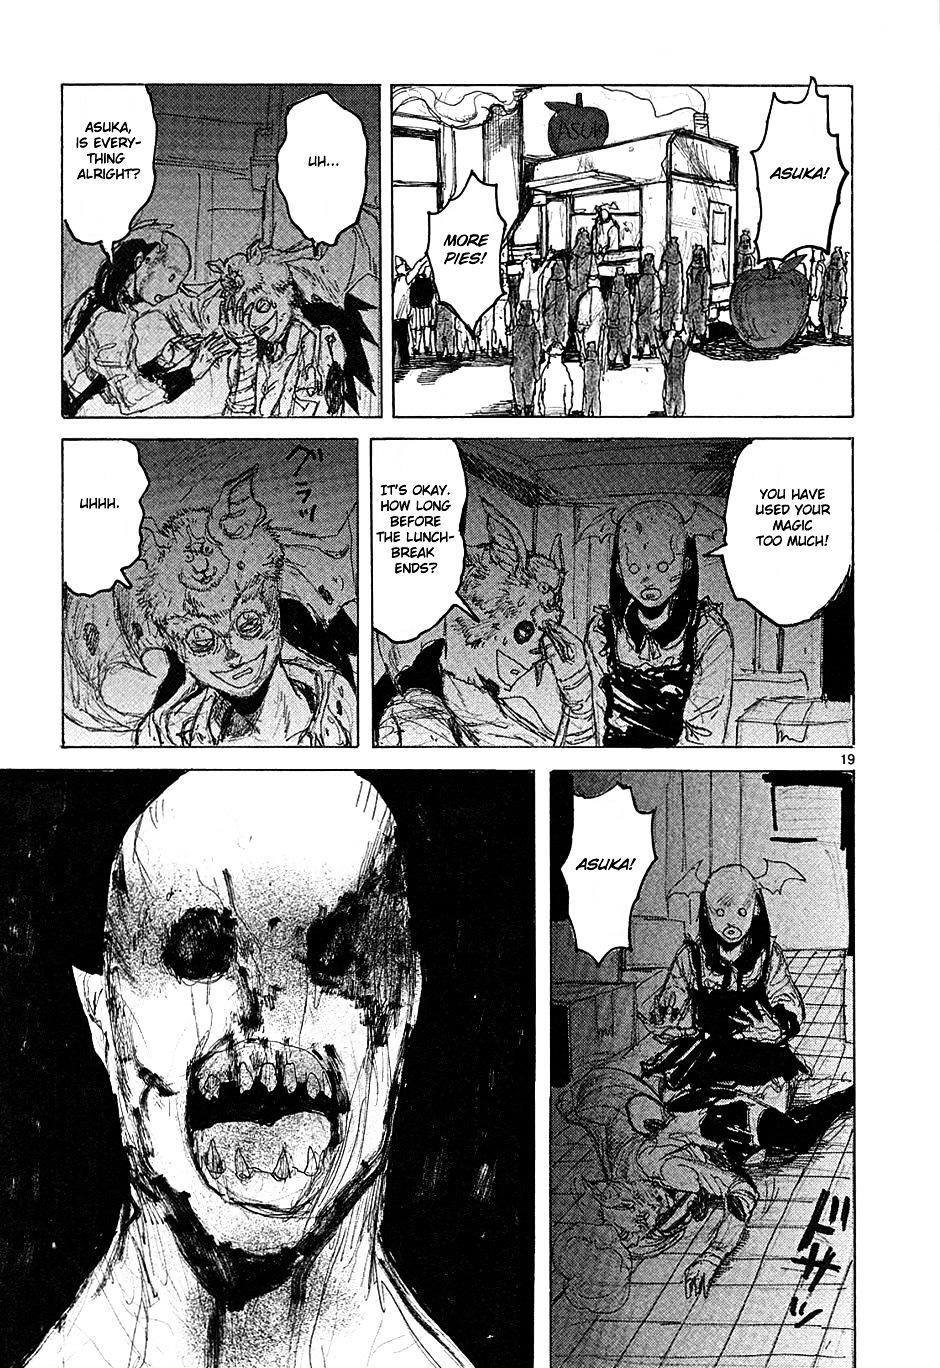 Dorohedoro Chapter 38 : Meatbags Free For All page 19 - Mangakakalot